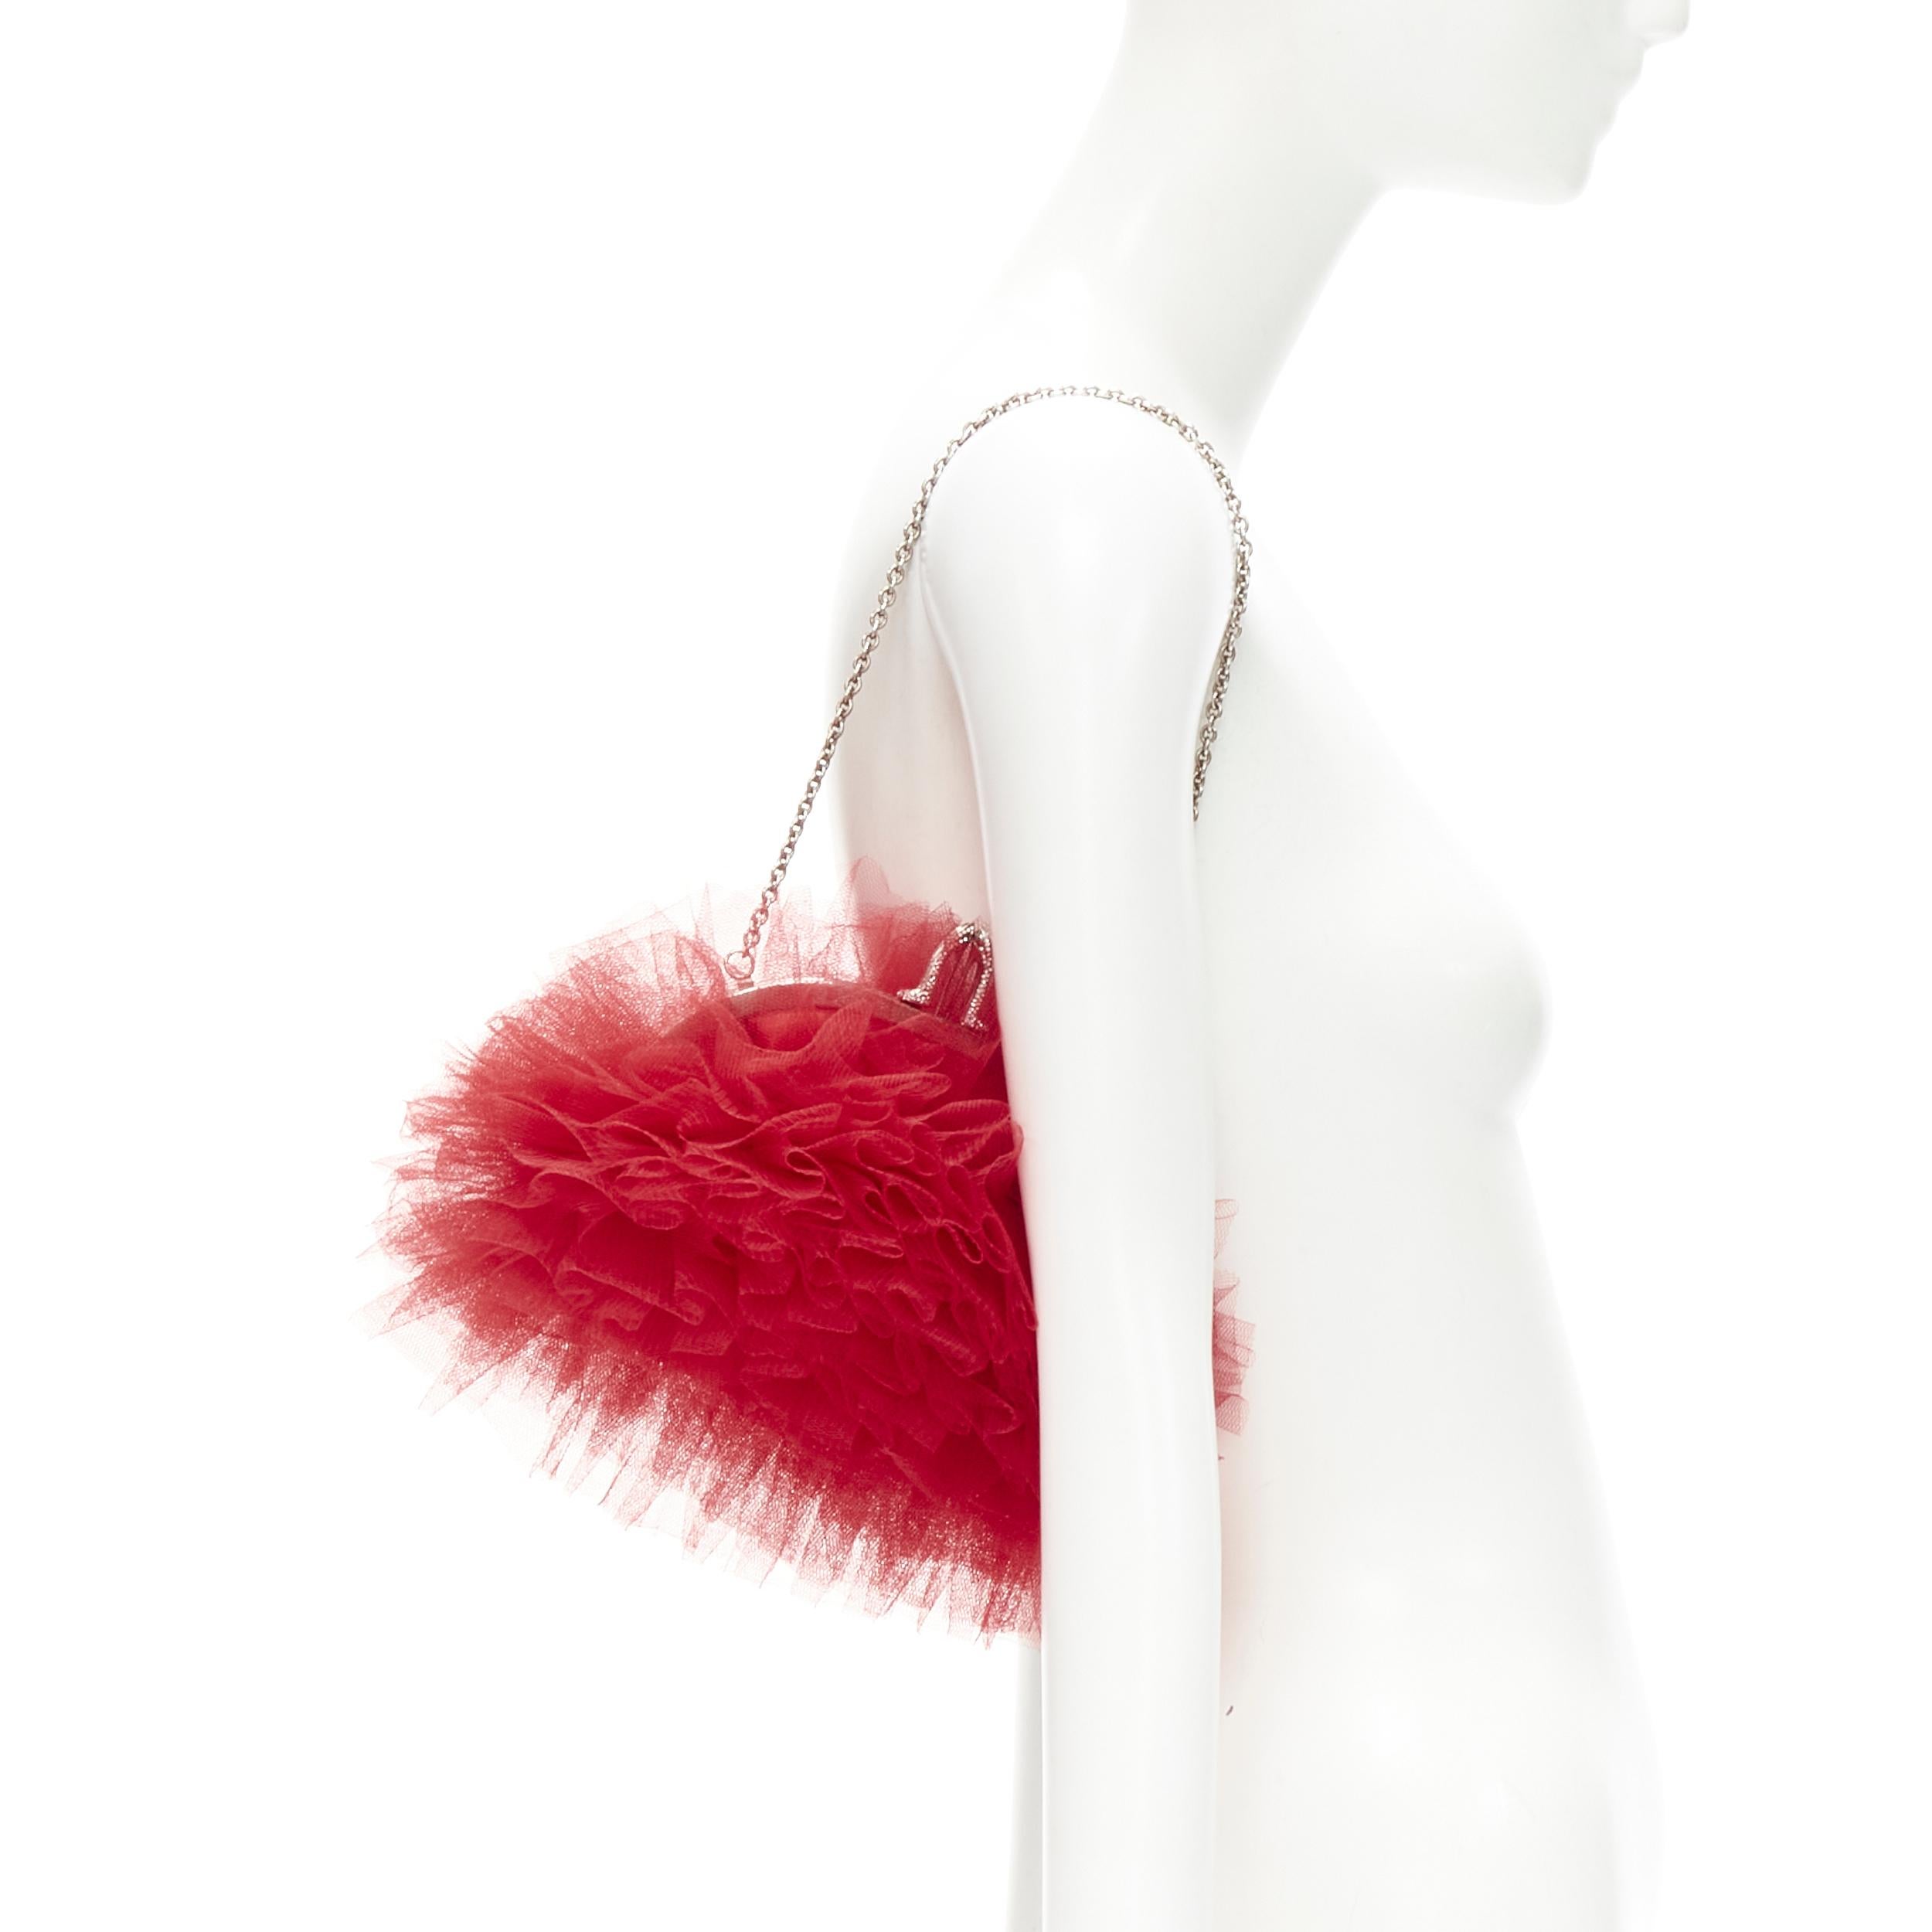 CHRISTIAN LOUBOUTIN Tutulle red tulle strass crystal heel clasp clutch bag 
Reference: TGAS/C01233 
Brand: Christian Louboutin 
Model: Tutulle 
Material: satin 
Color: Red 
Pattern: Solid 
Closure: Clasp 
Extra Detail: Silver-tone crystal encrusted